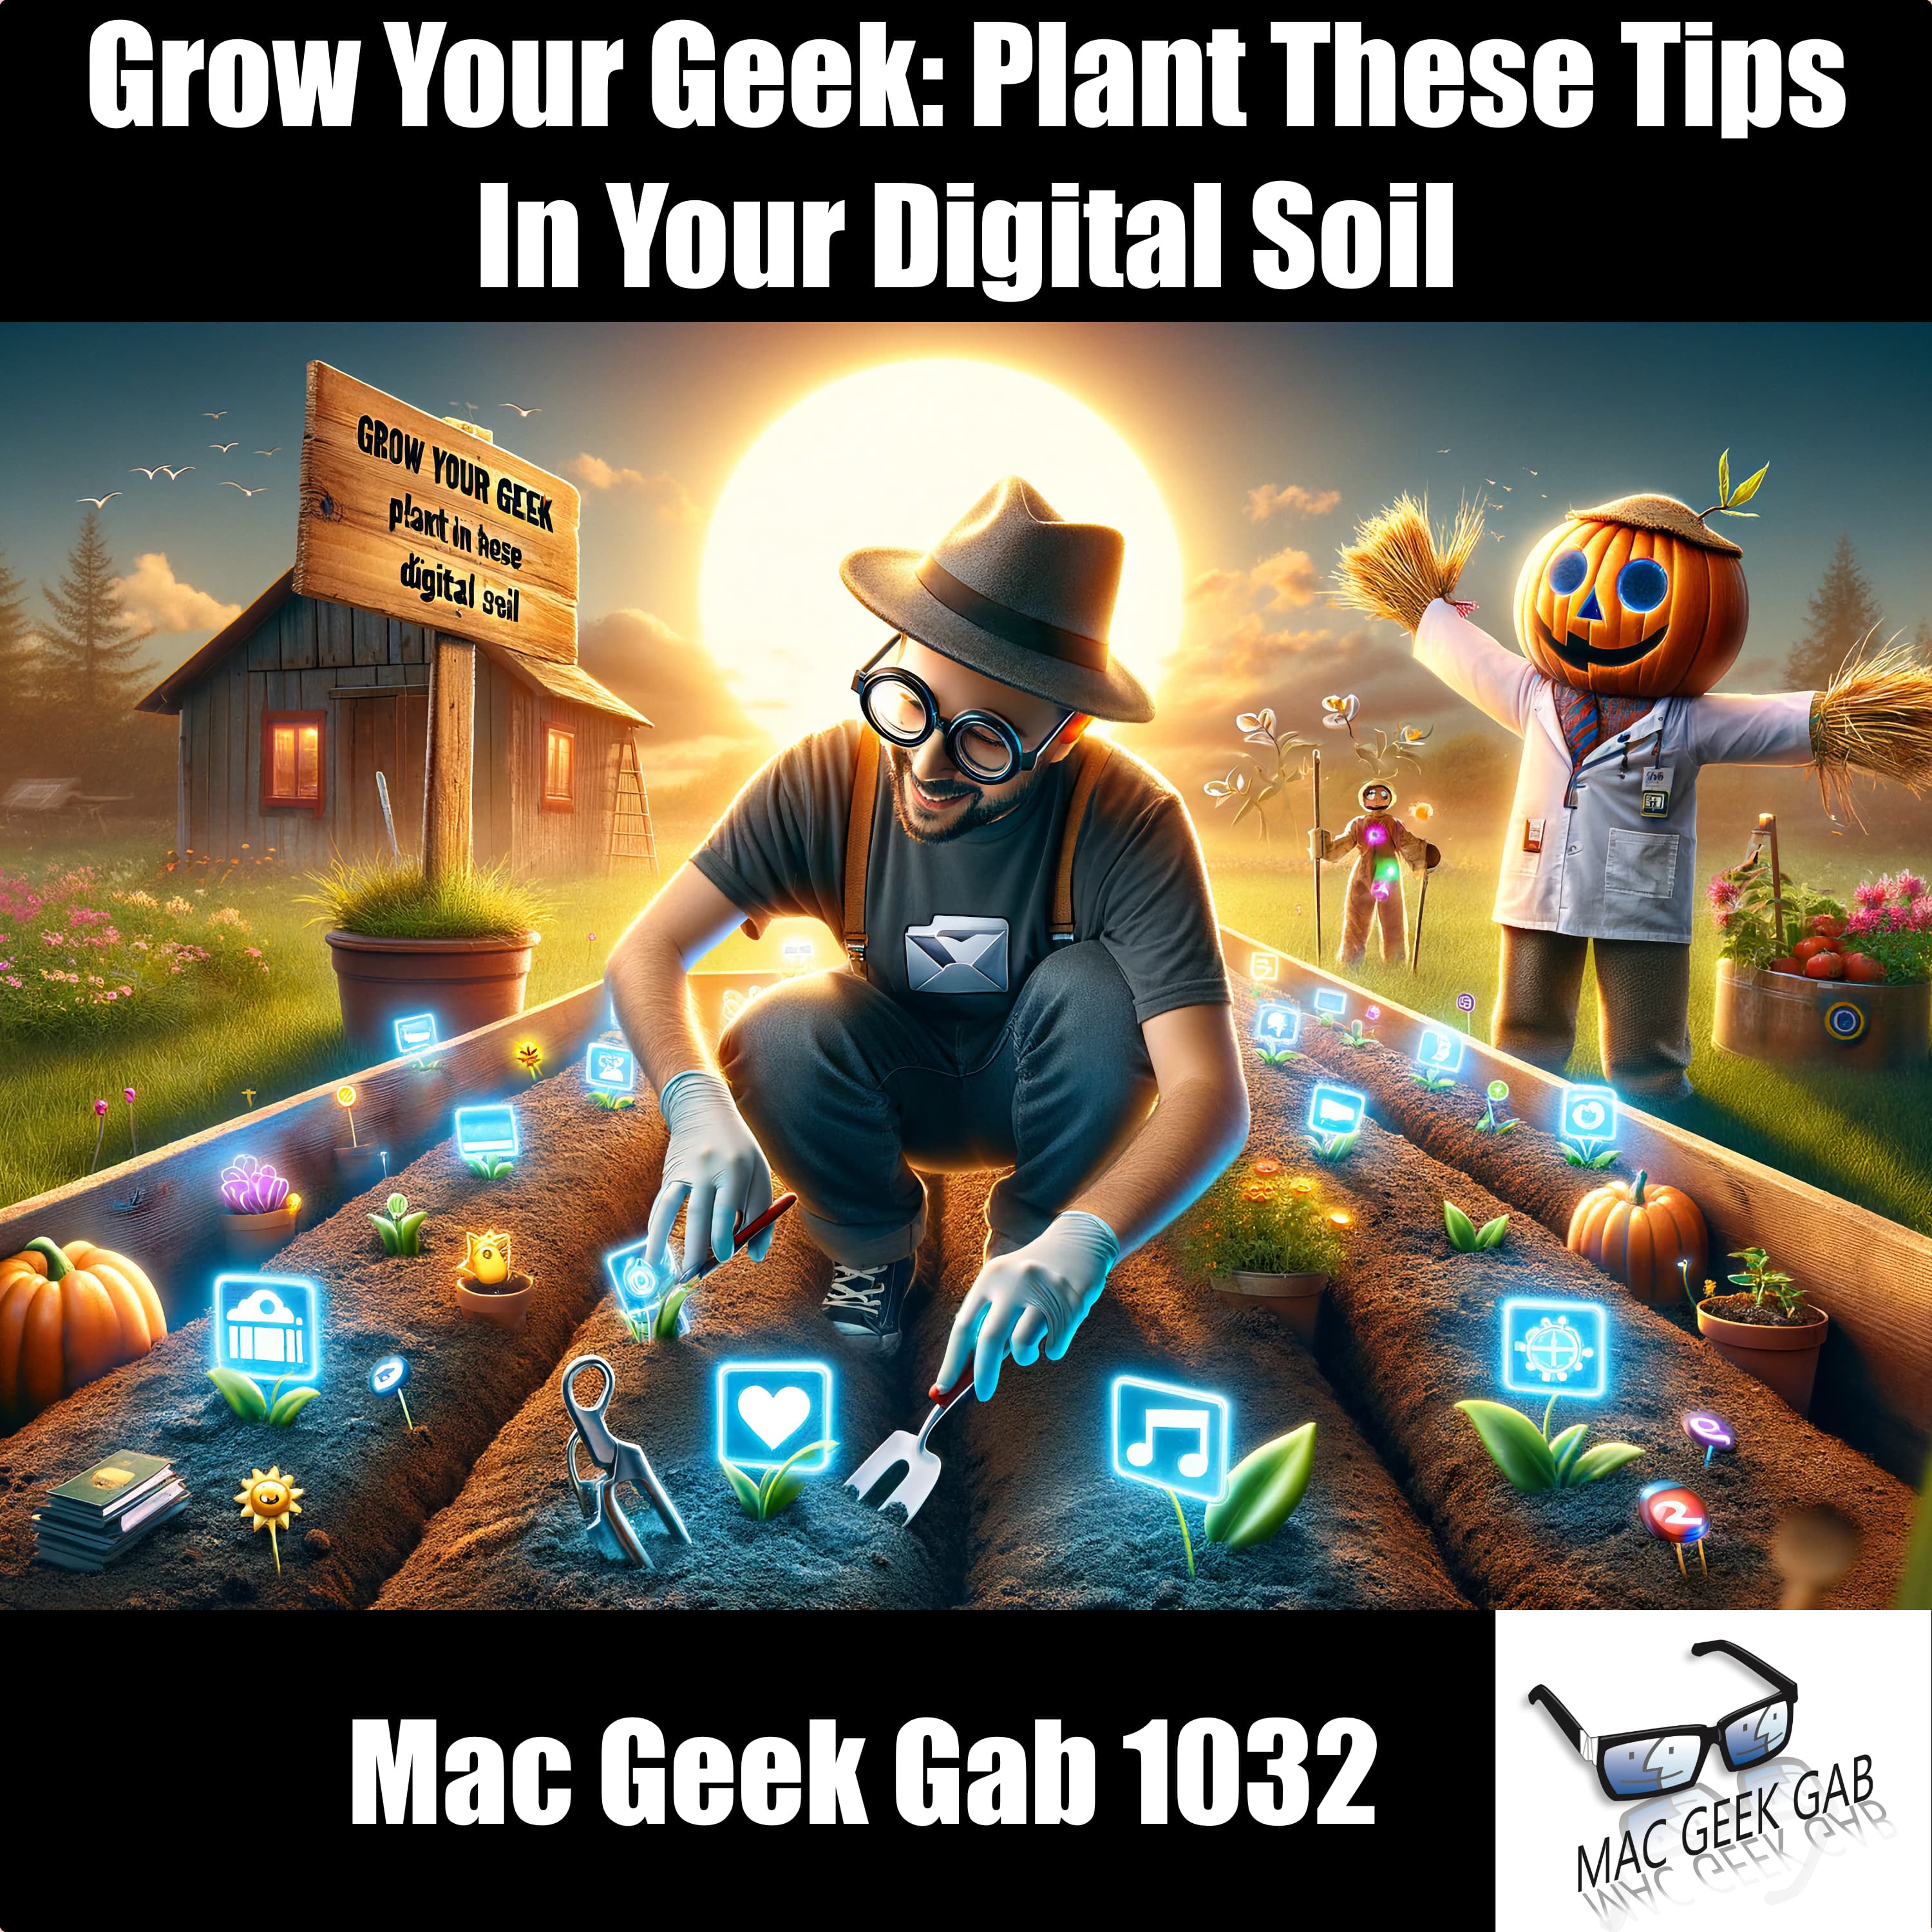 Grow Your Geek: Plant These Tips In Your Digital Soil